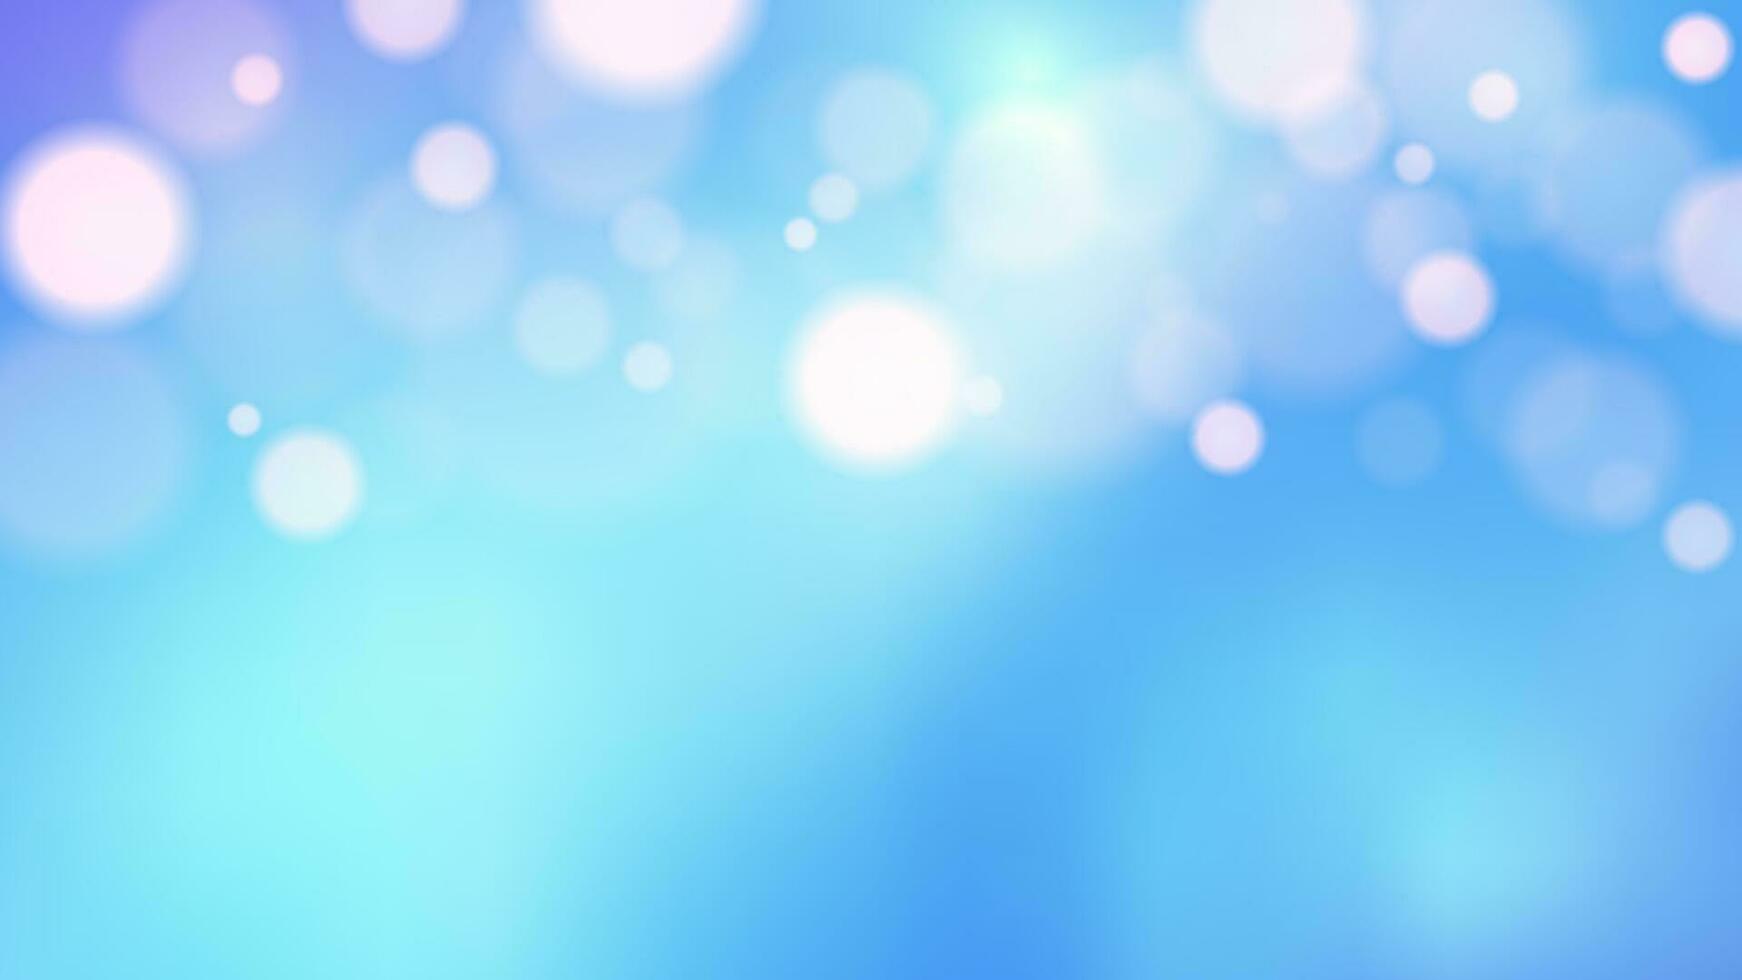 Abstract blue sky background with blur bokeh light. Romantic dreamy vector backdrop with copy space for text